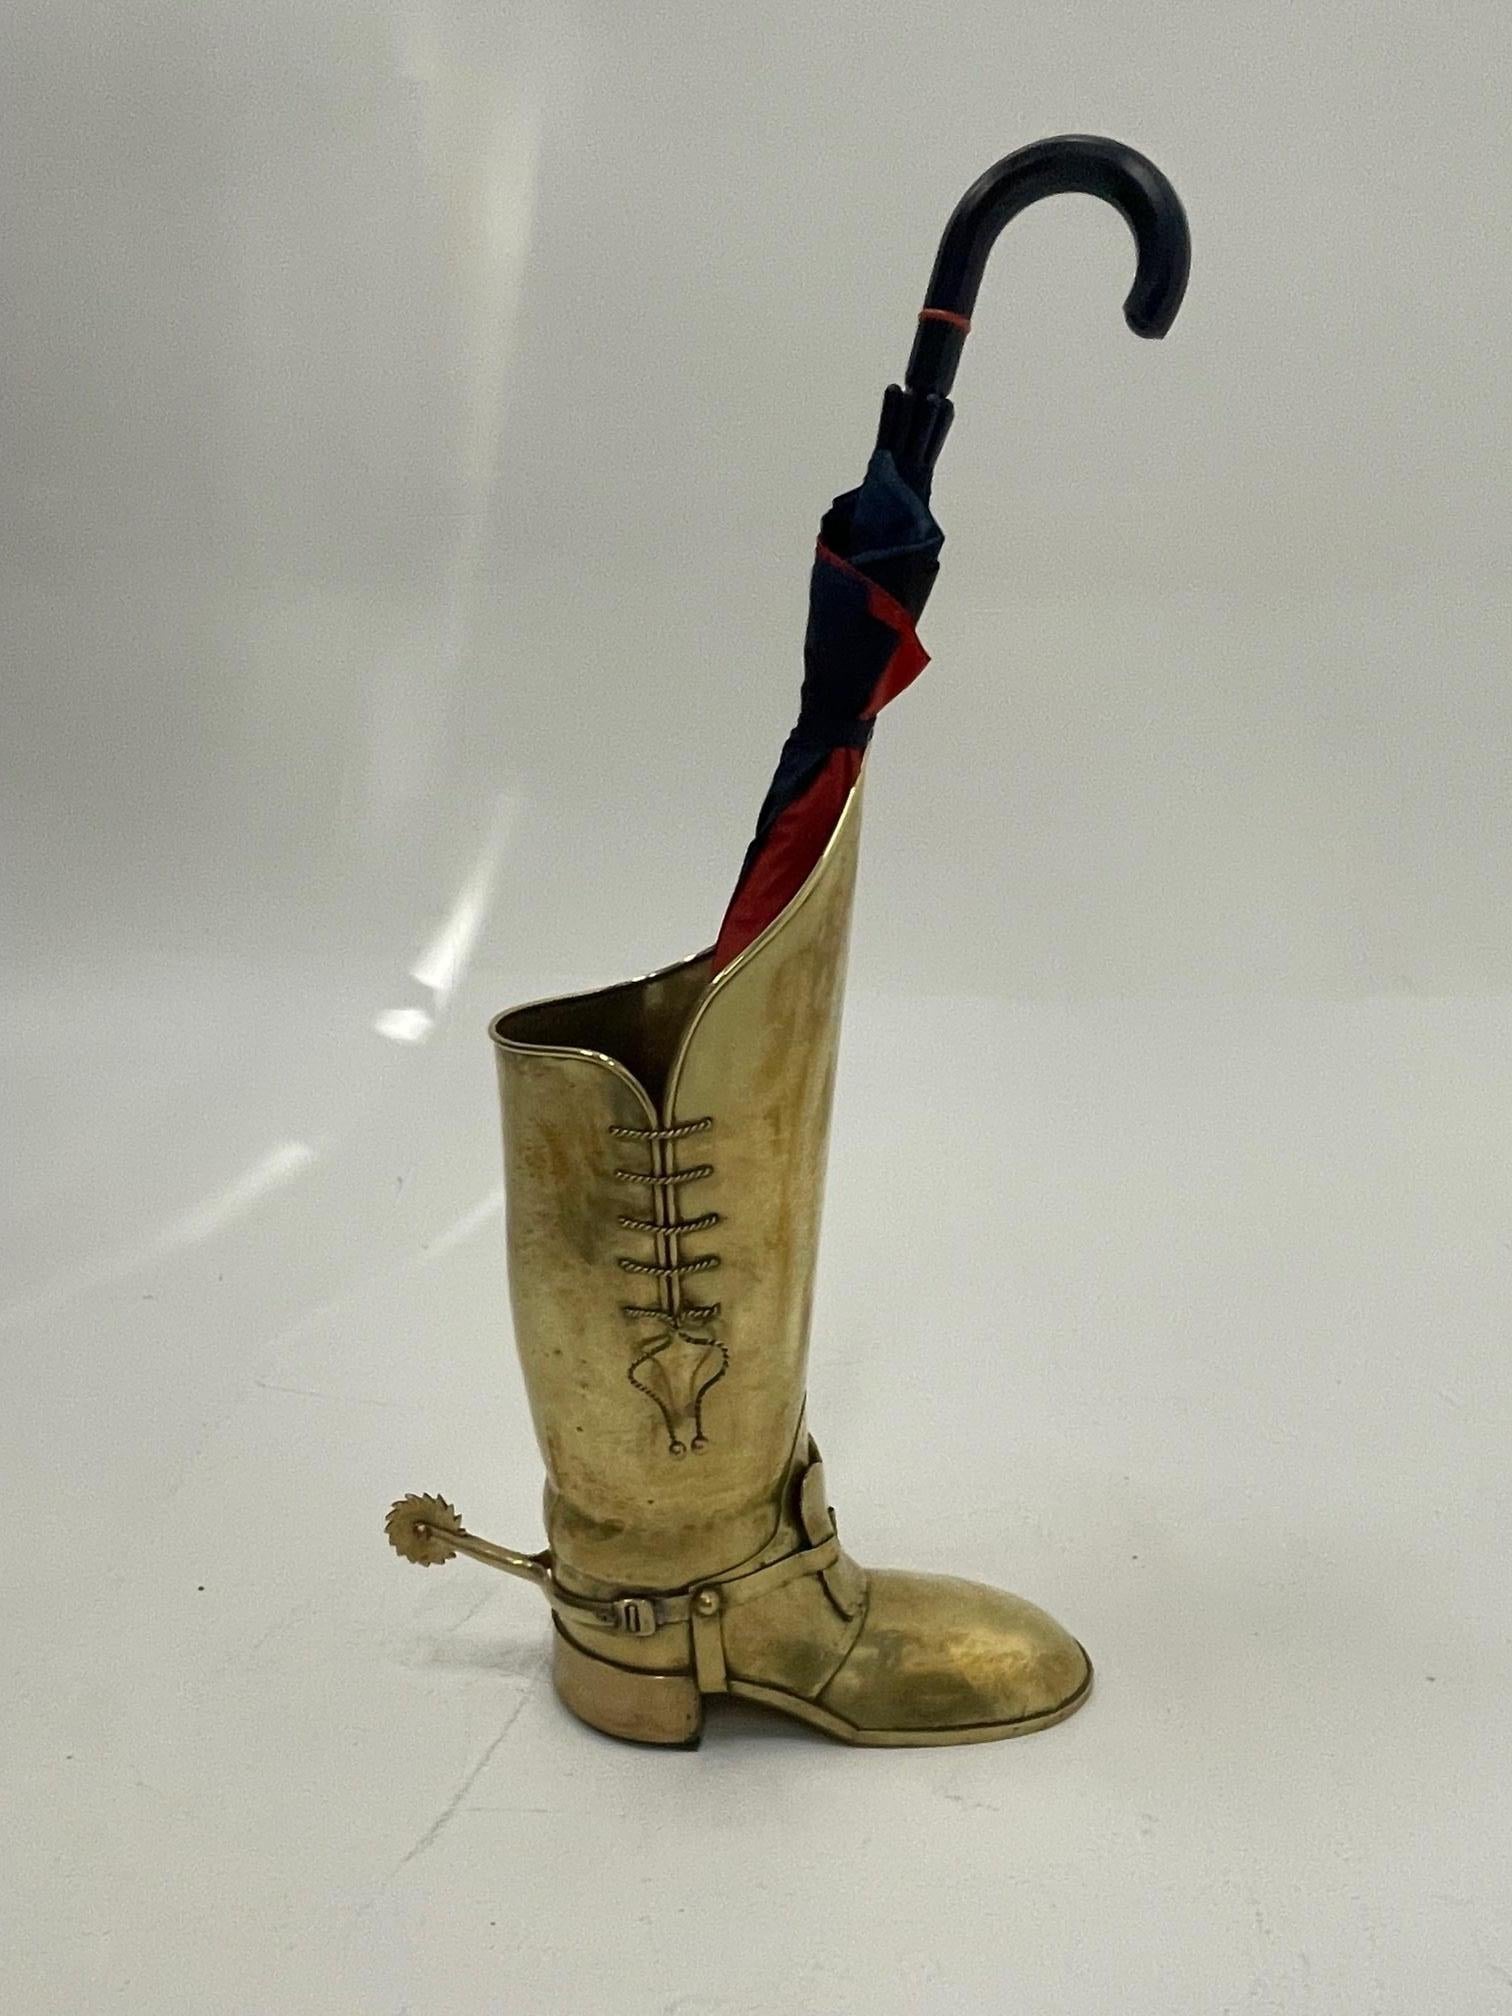 Marvelously crafted hand made polished brass umbrella stand in the shape of a handsome boot with incredible details including spiky spur, laces, and buckles. Made in Italy stamped on bottom.